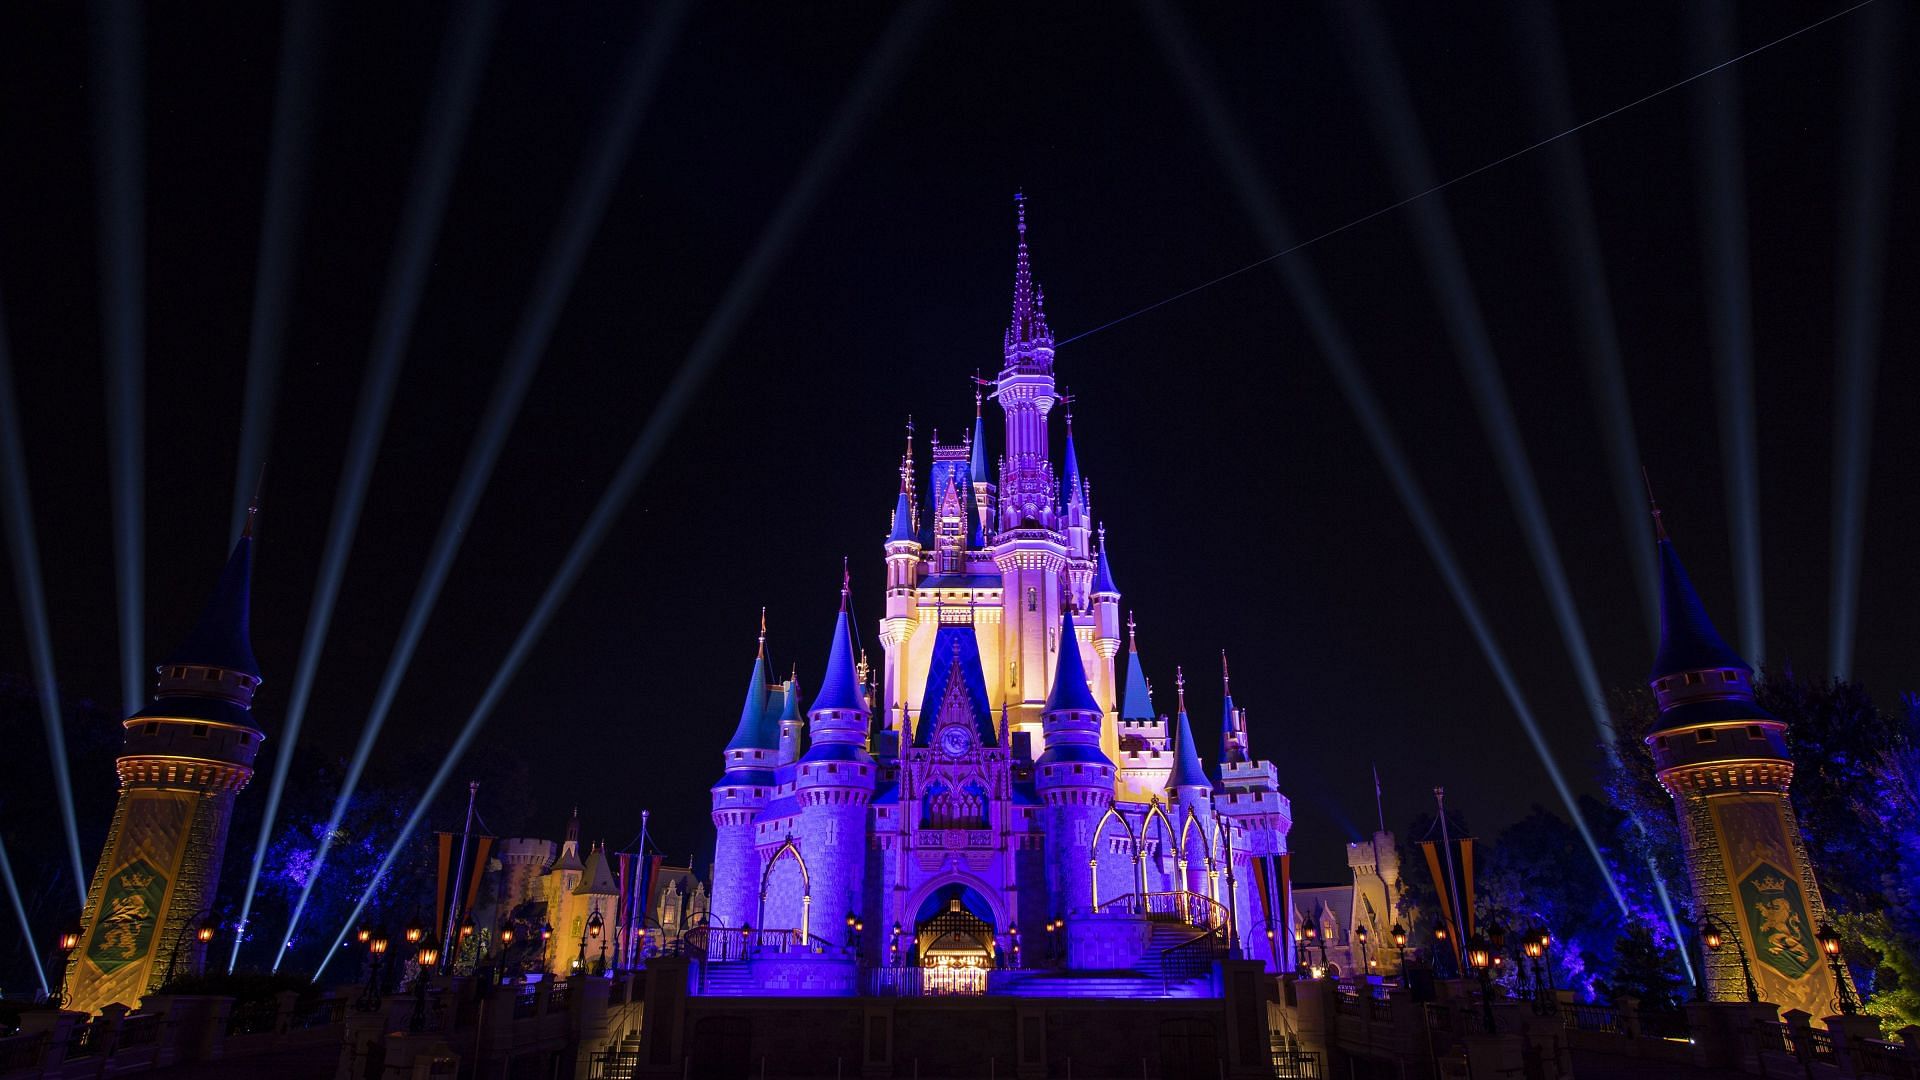 Cinderella Castle At Walt Disney World Is Lit Purple And Gold for 2020 NBA Champion Los Angeles Lakers